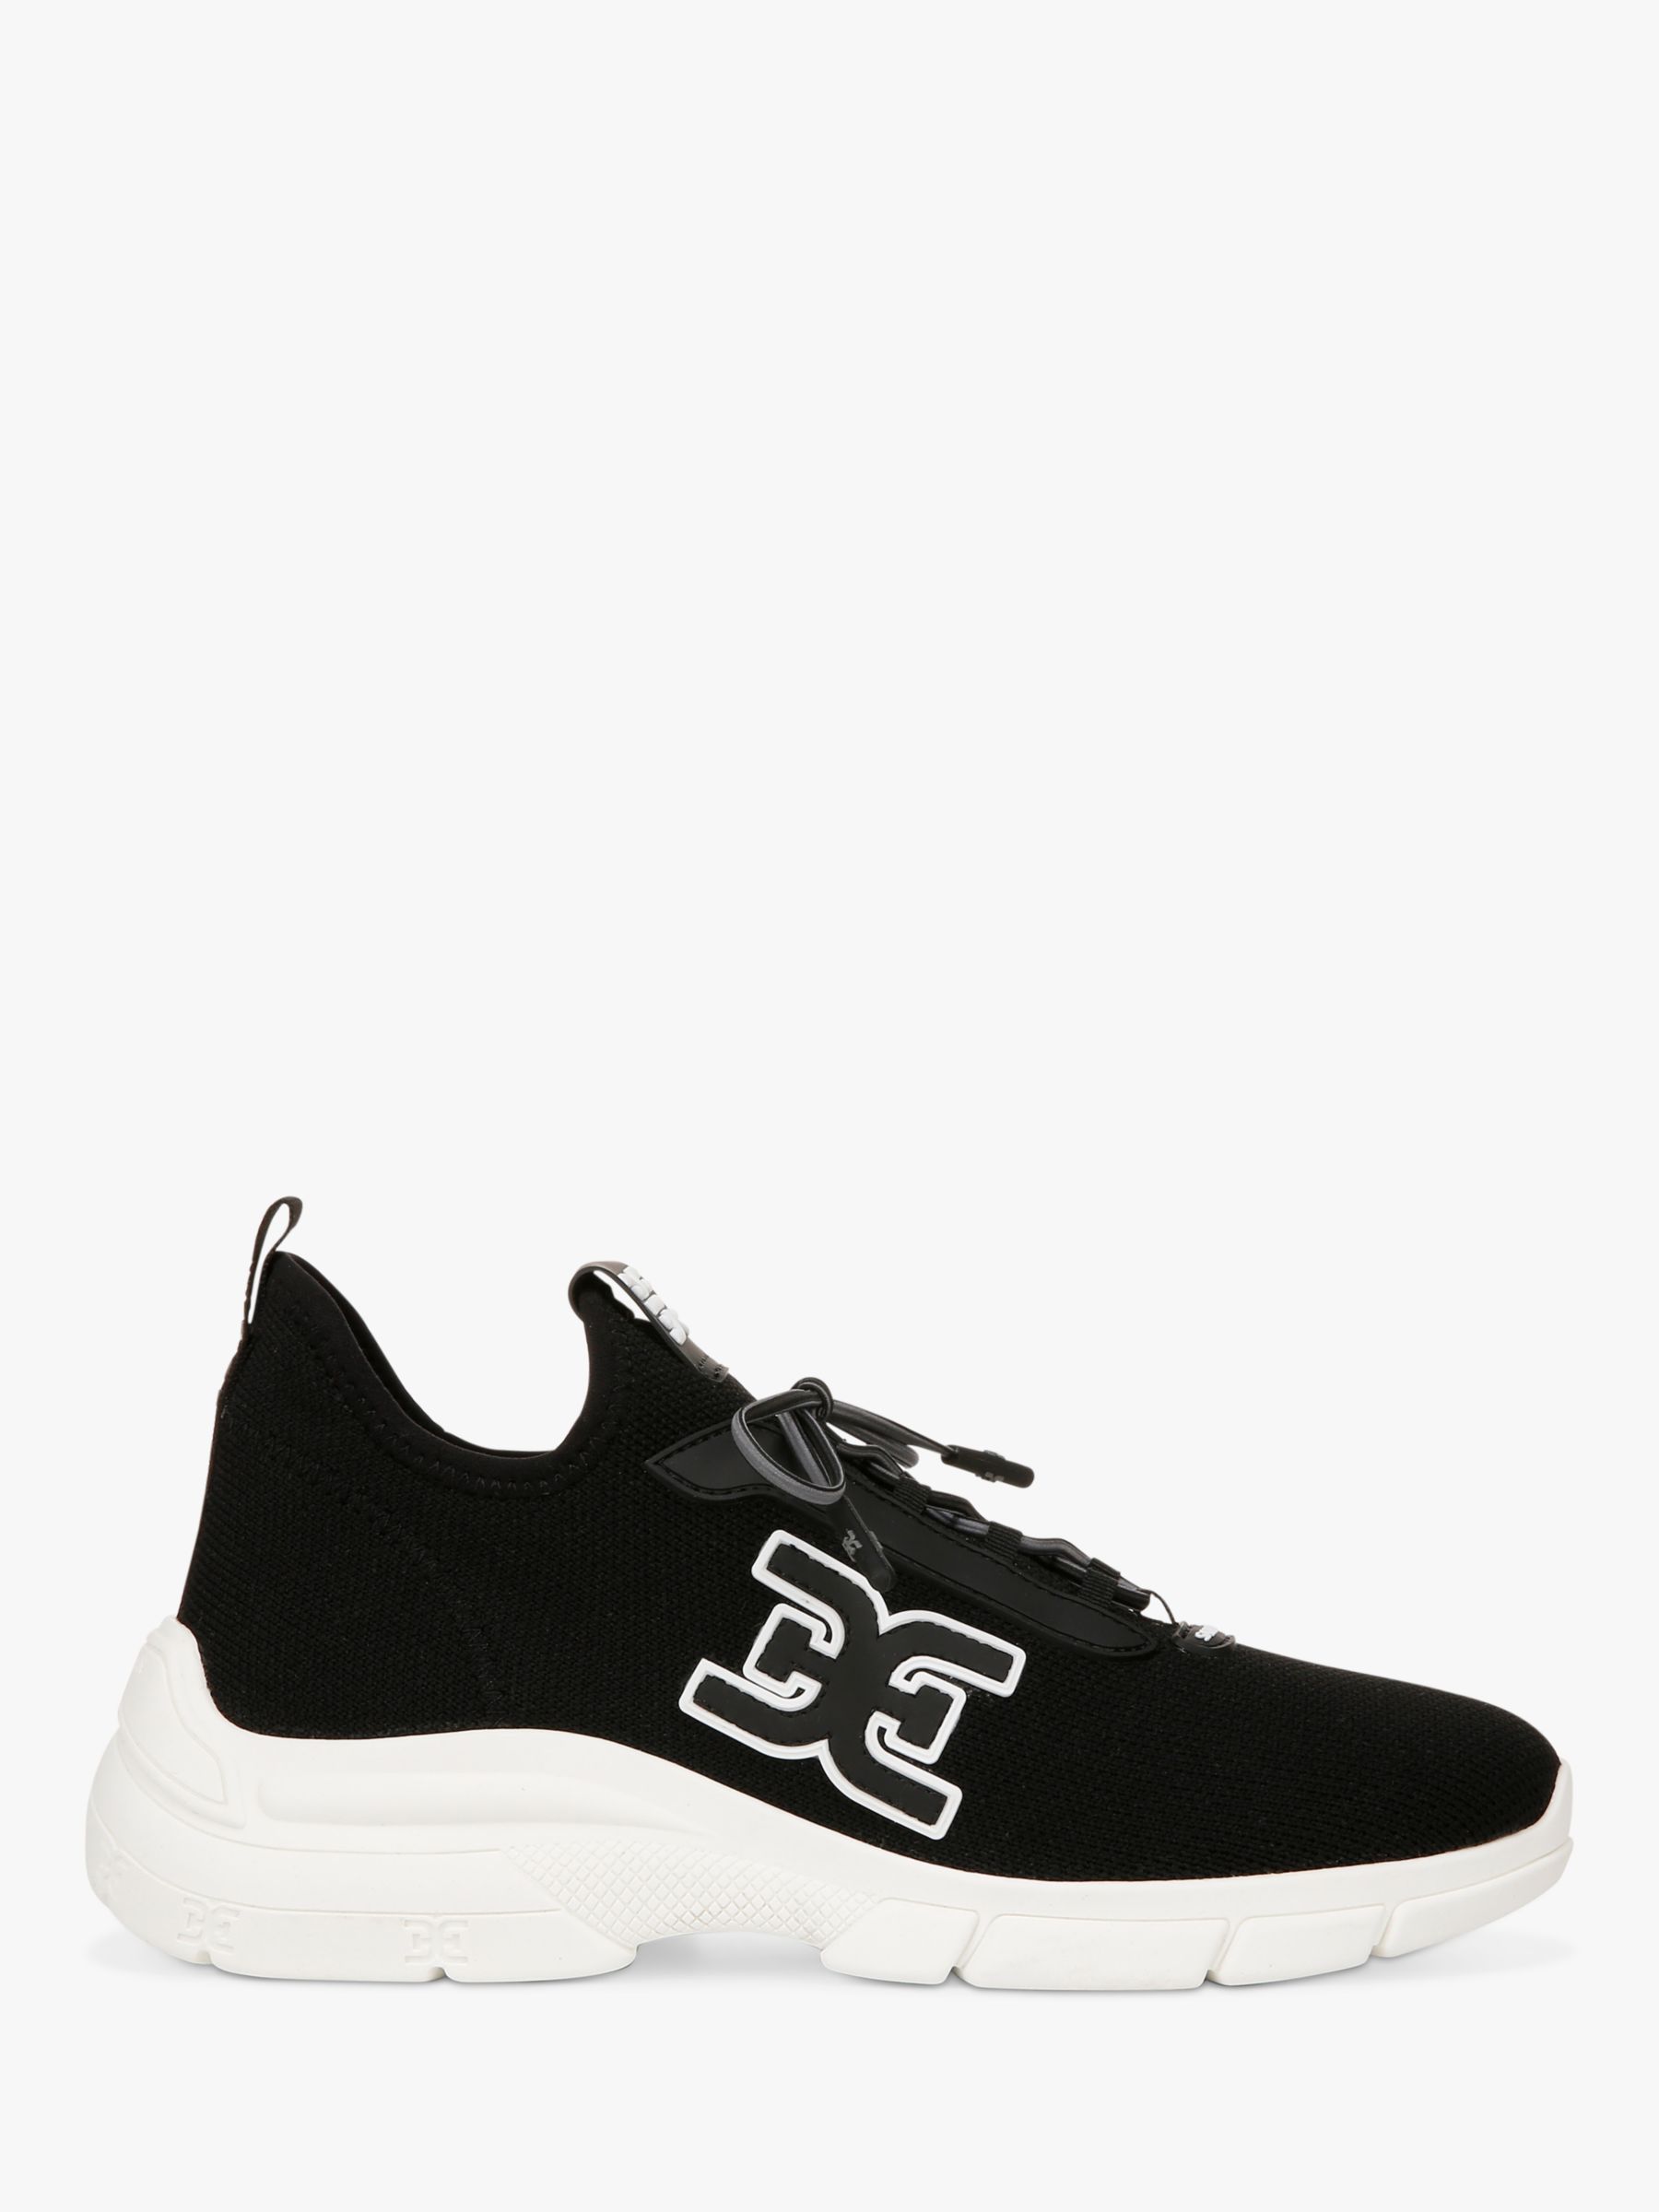 Sam Edelman Cami Knitted Trainers, Black at John Lewis & Partners